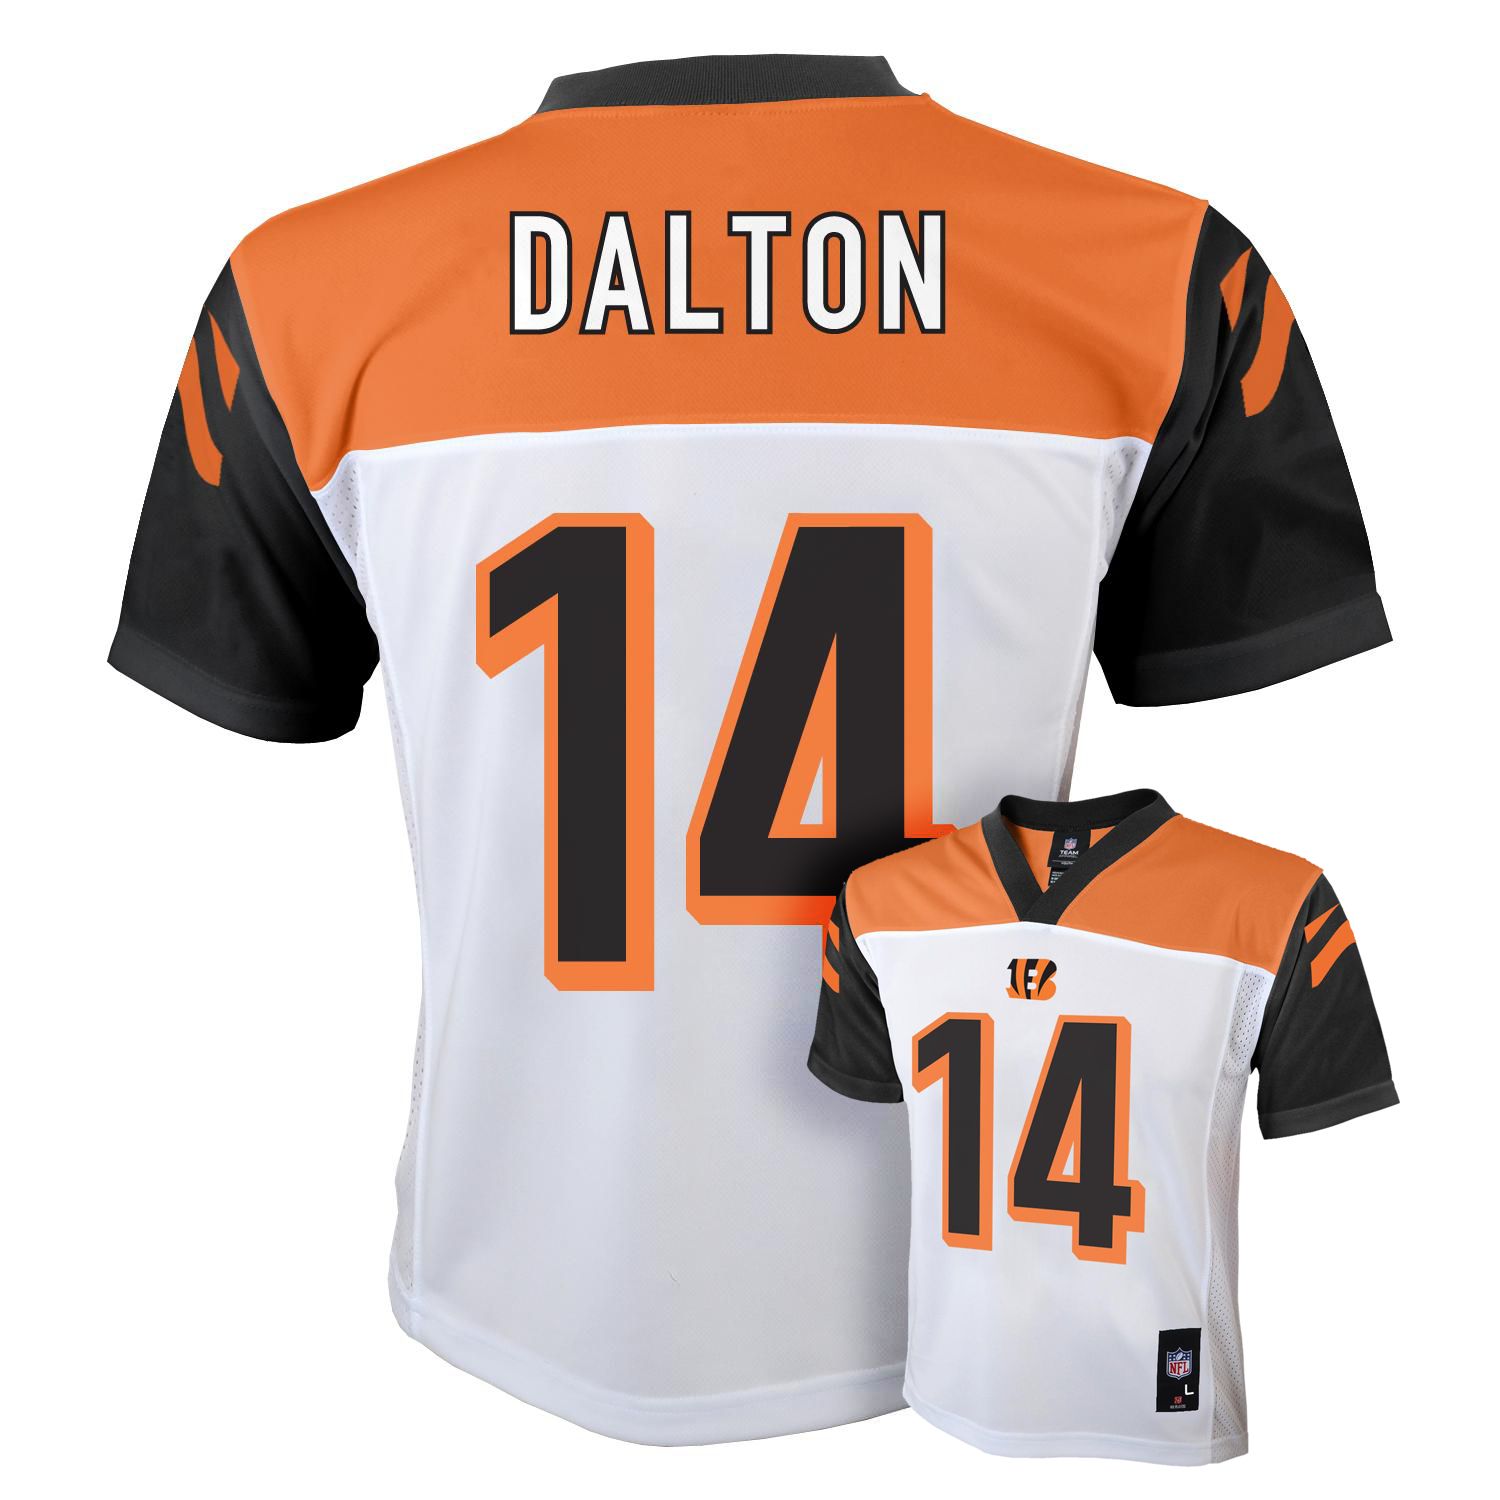 andy dalton jersey number